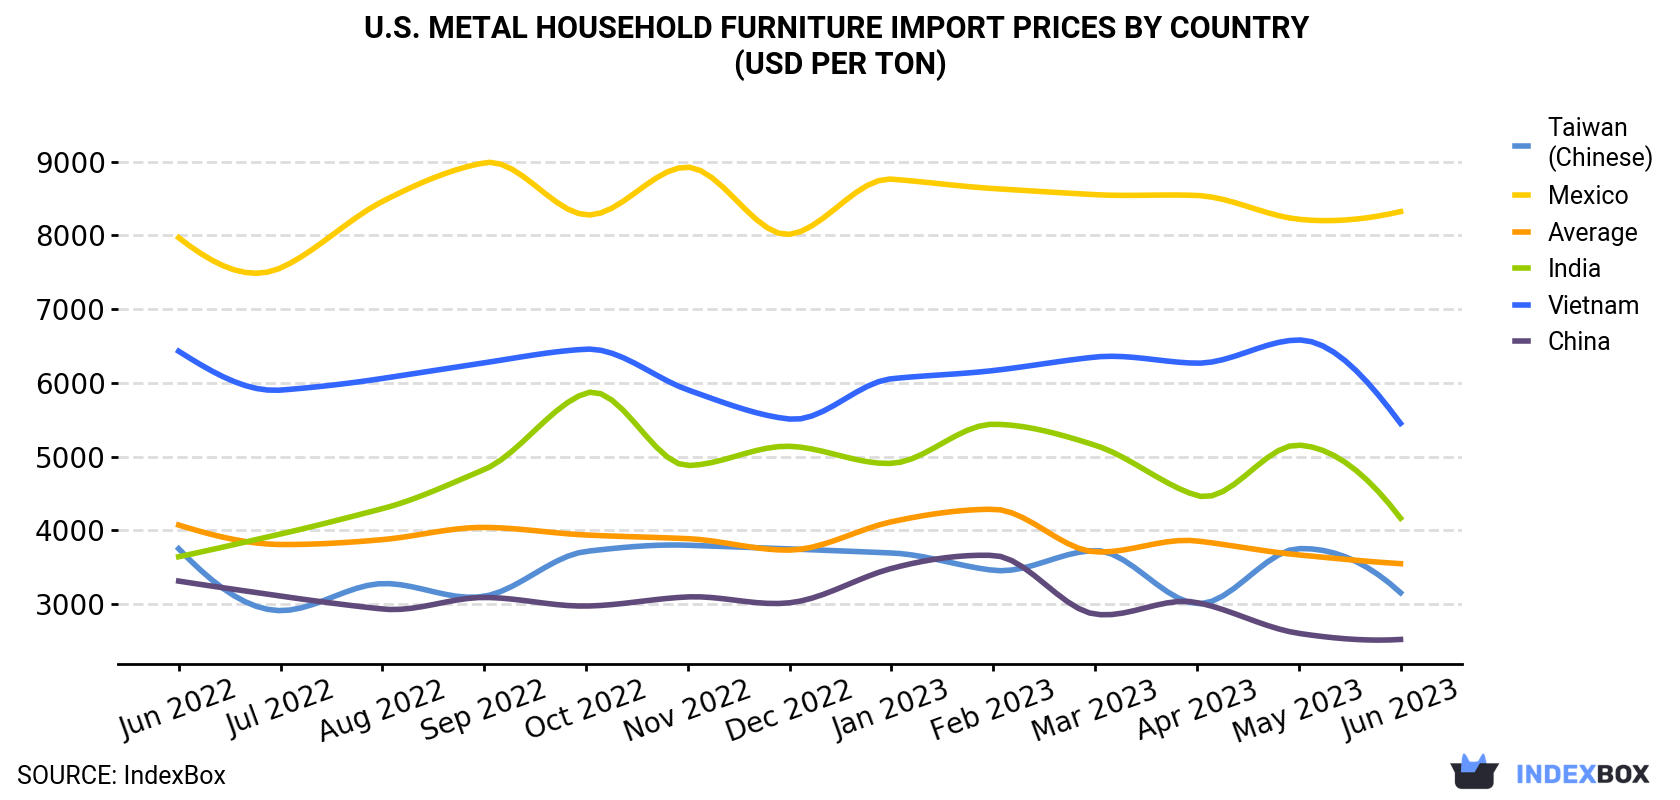 U.S. Metal Household Furniture Import Prices By Country (USD Per Ton)